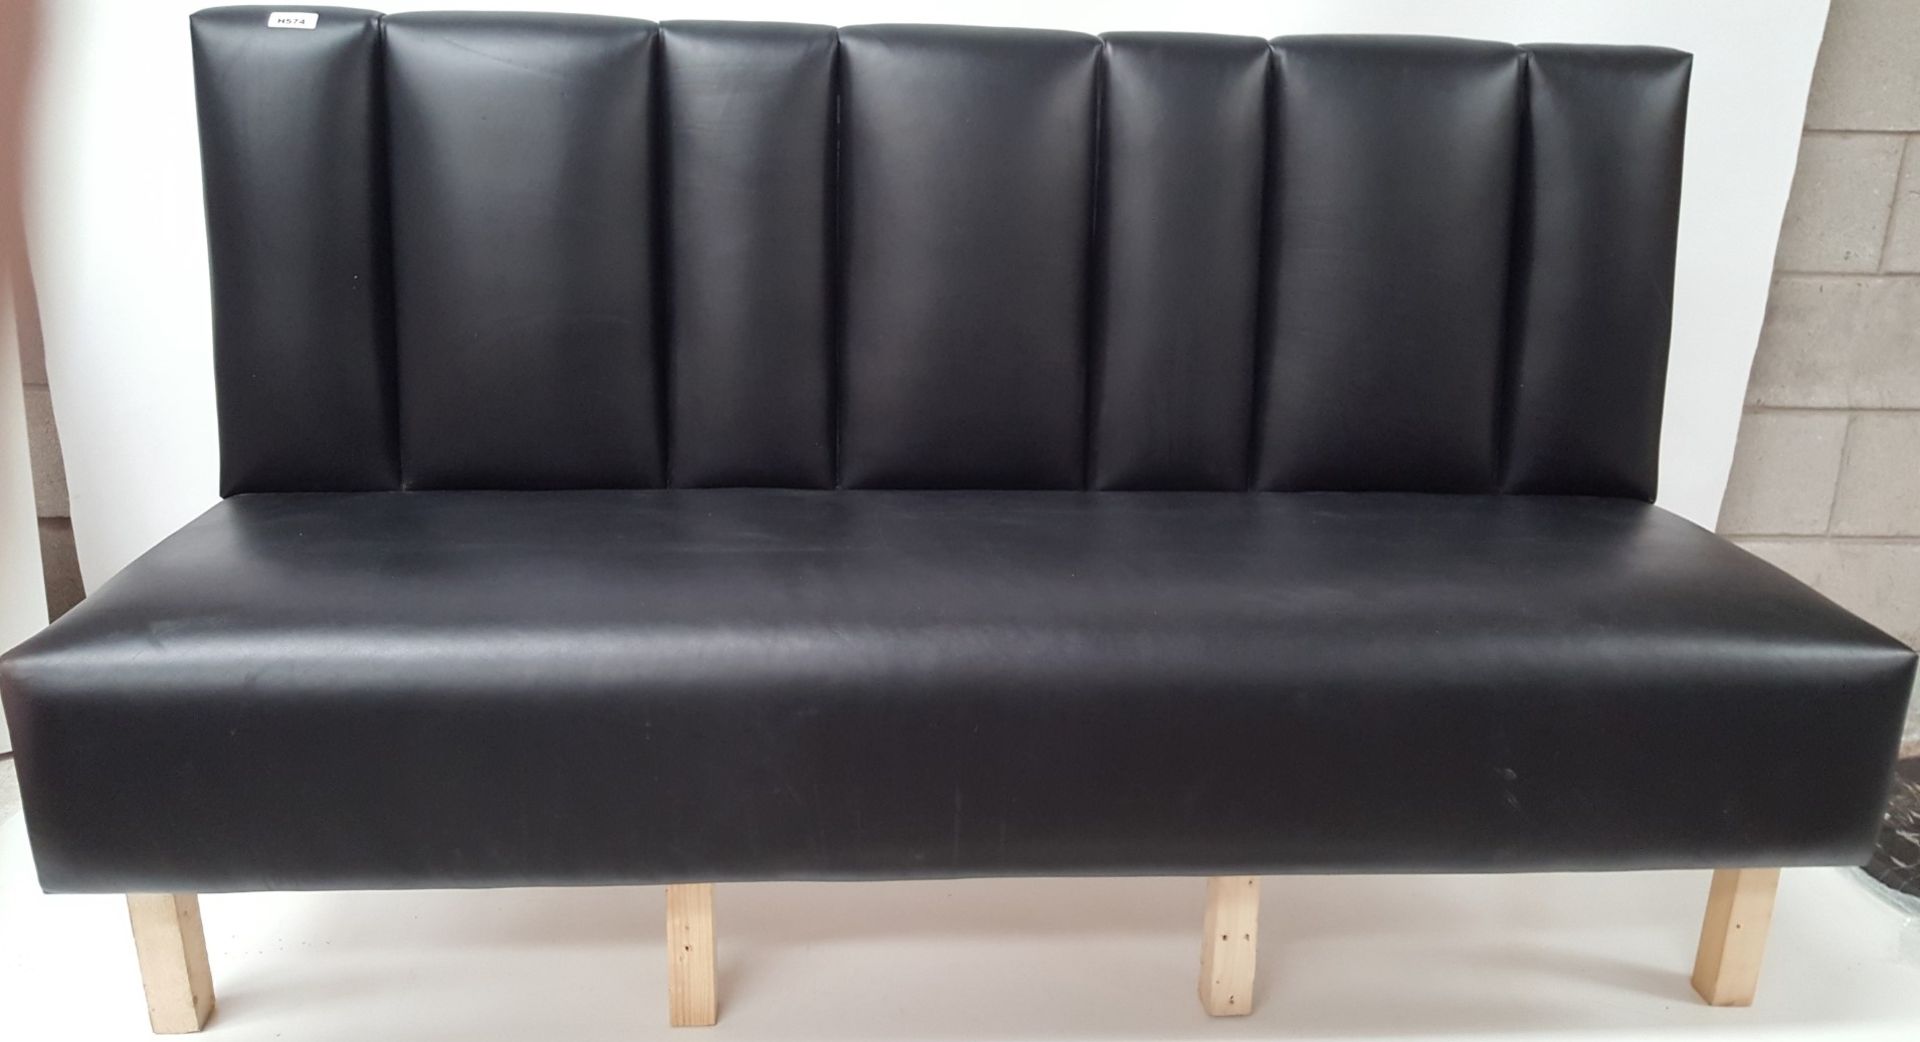 3 Pieces Of Black Upholstered Faux Leather Seating Booths - CL431 - Location: Altrincham WA14 - Image 5 of 19